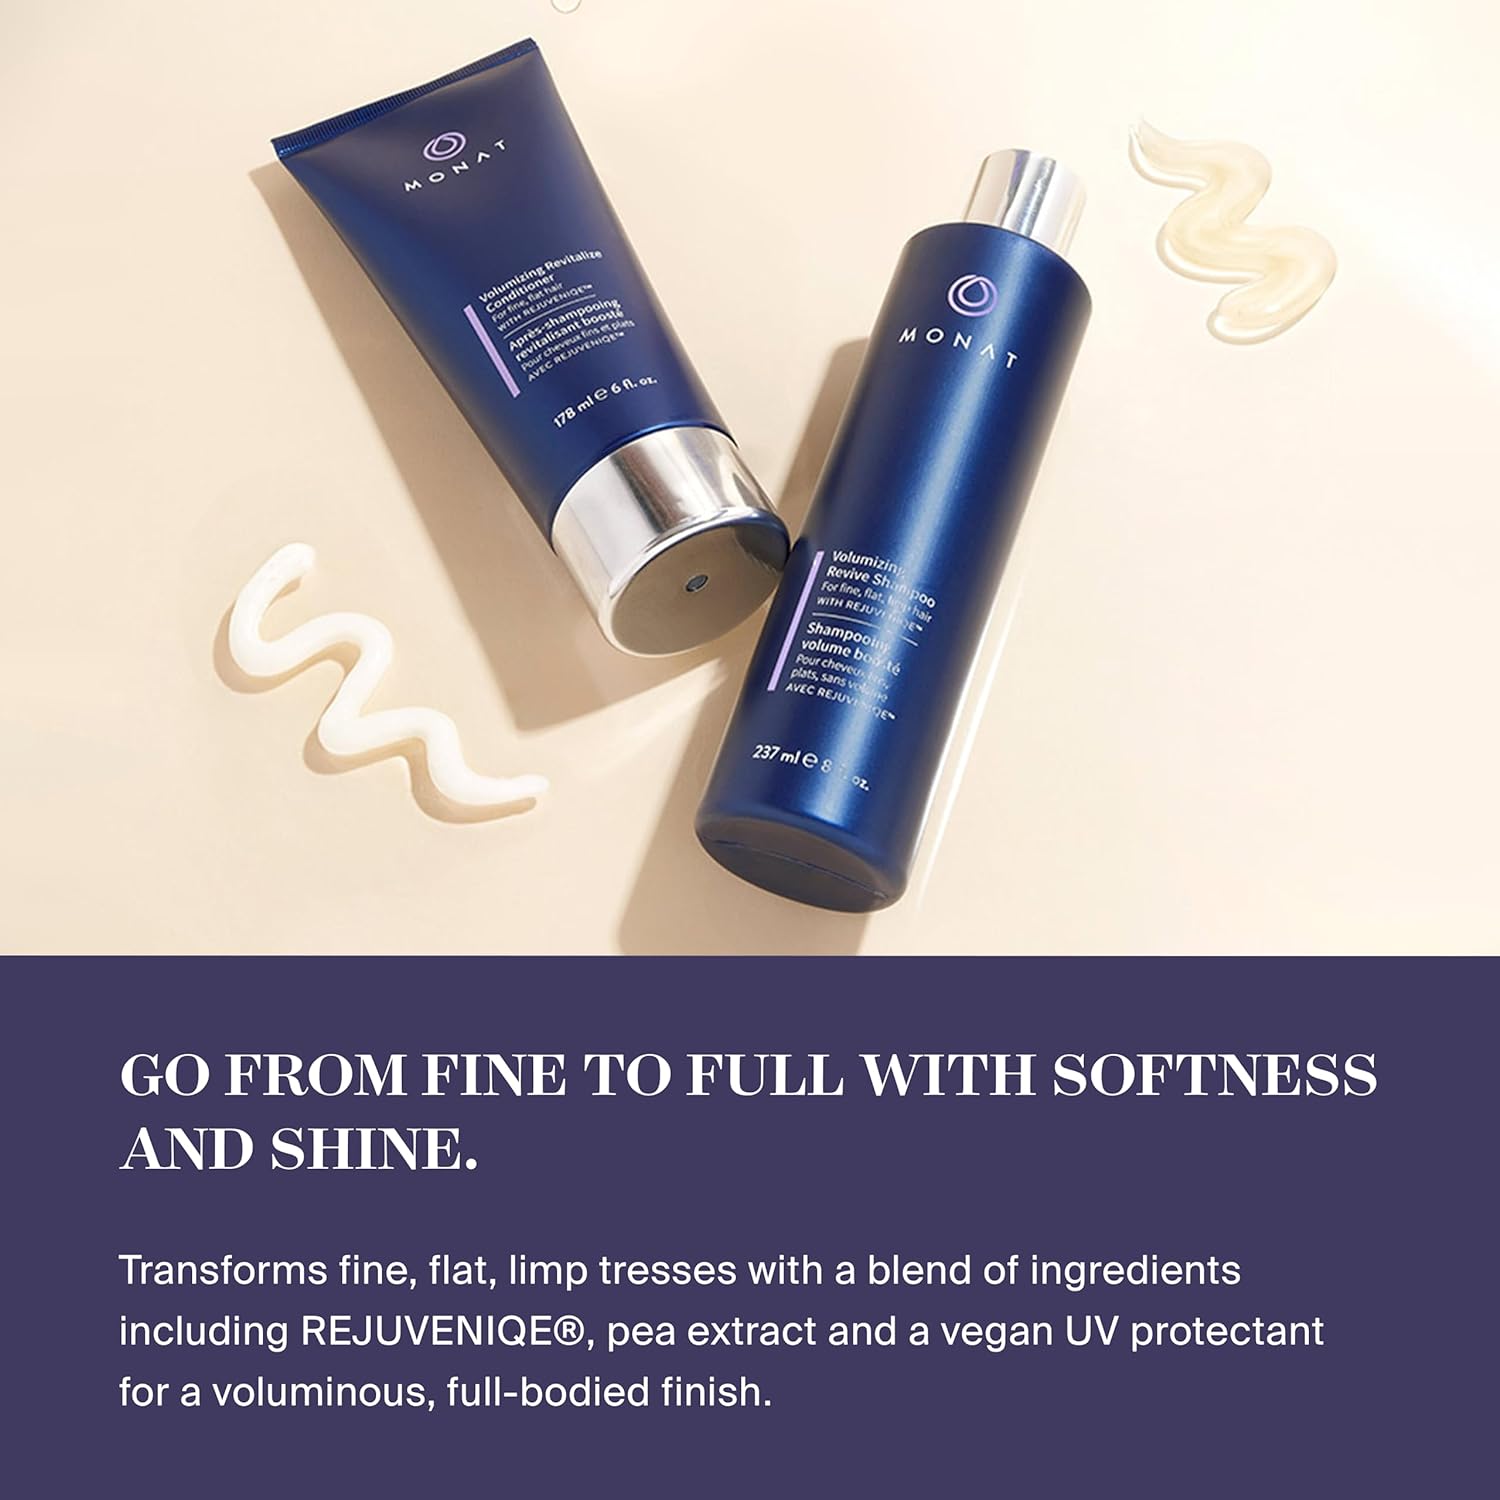 MONAT Volumizing Revitalize Conditioner Infused with Rejuveniqe - Lightweight Hair Volumizing Conditioner for Fine, Flat Hair, for Softness and Shine - Net Wt. 178 ml ? 6 fl. oz. : Beauty & Personal Care